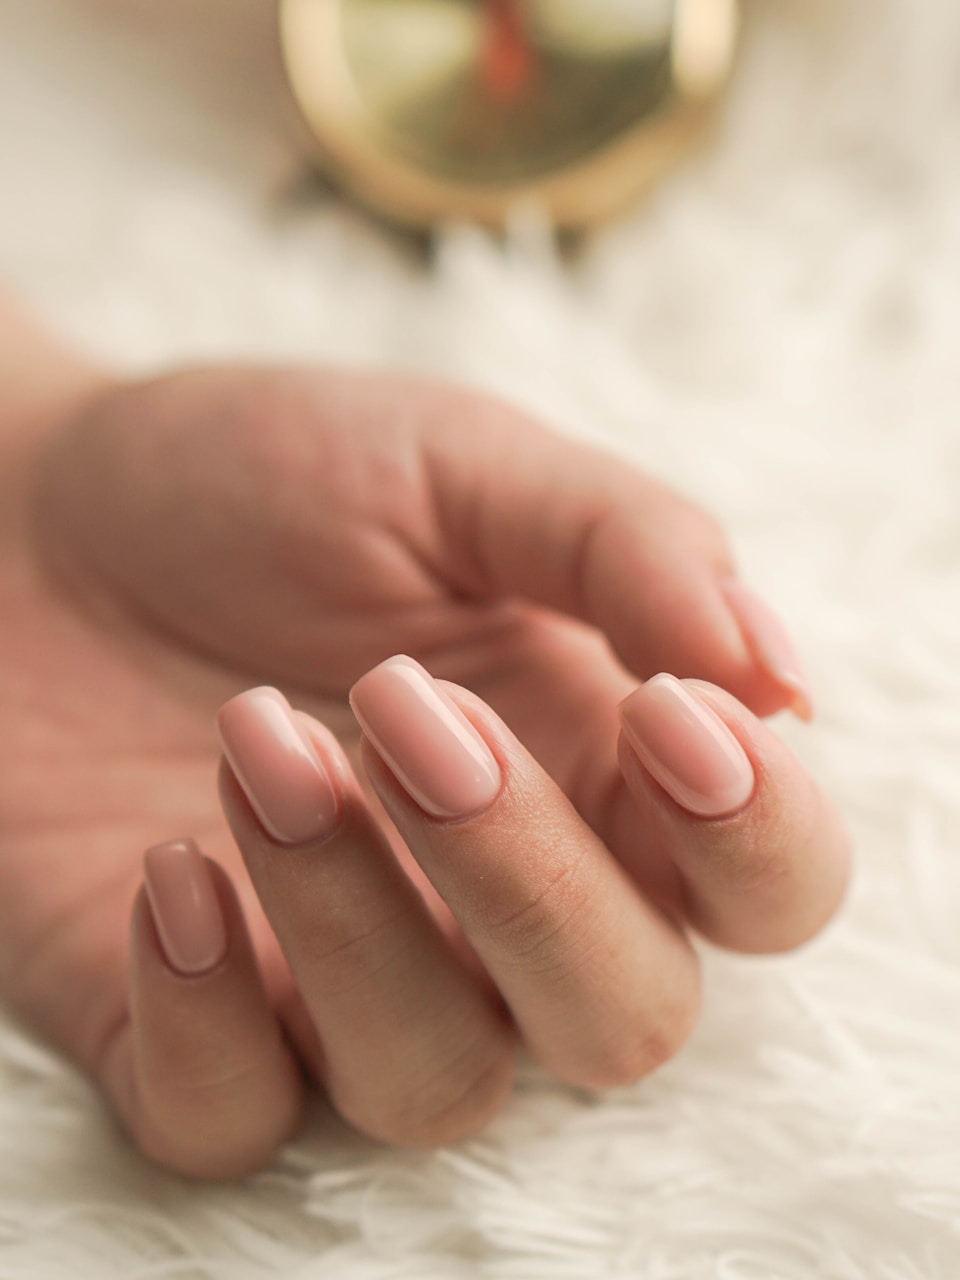 Red half moon nails? New Covid-19 symptoms to watch out for